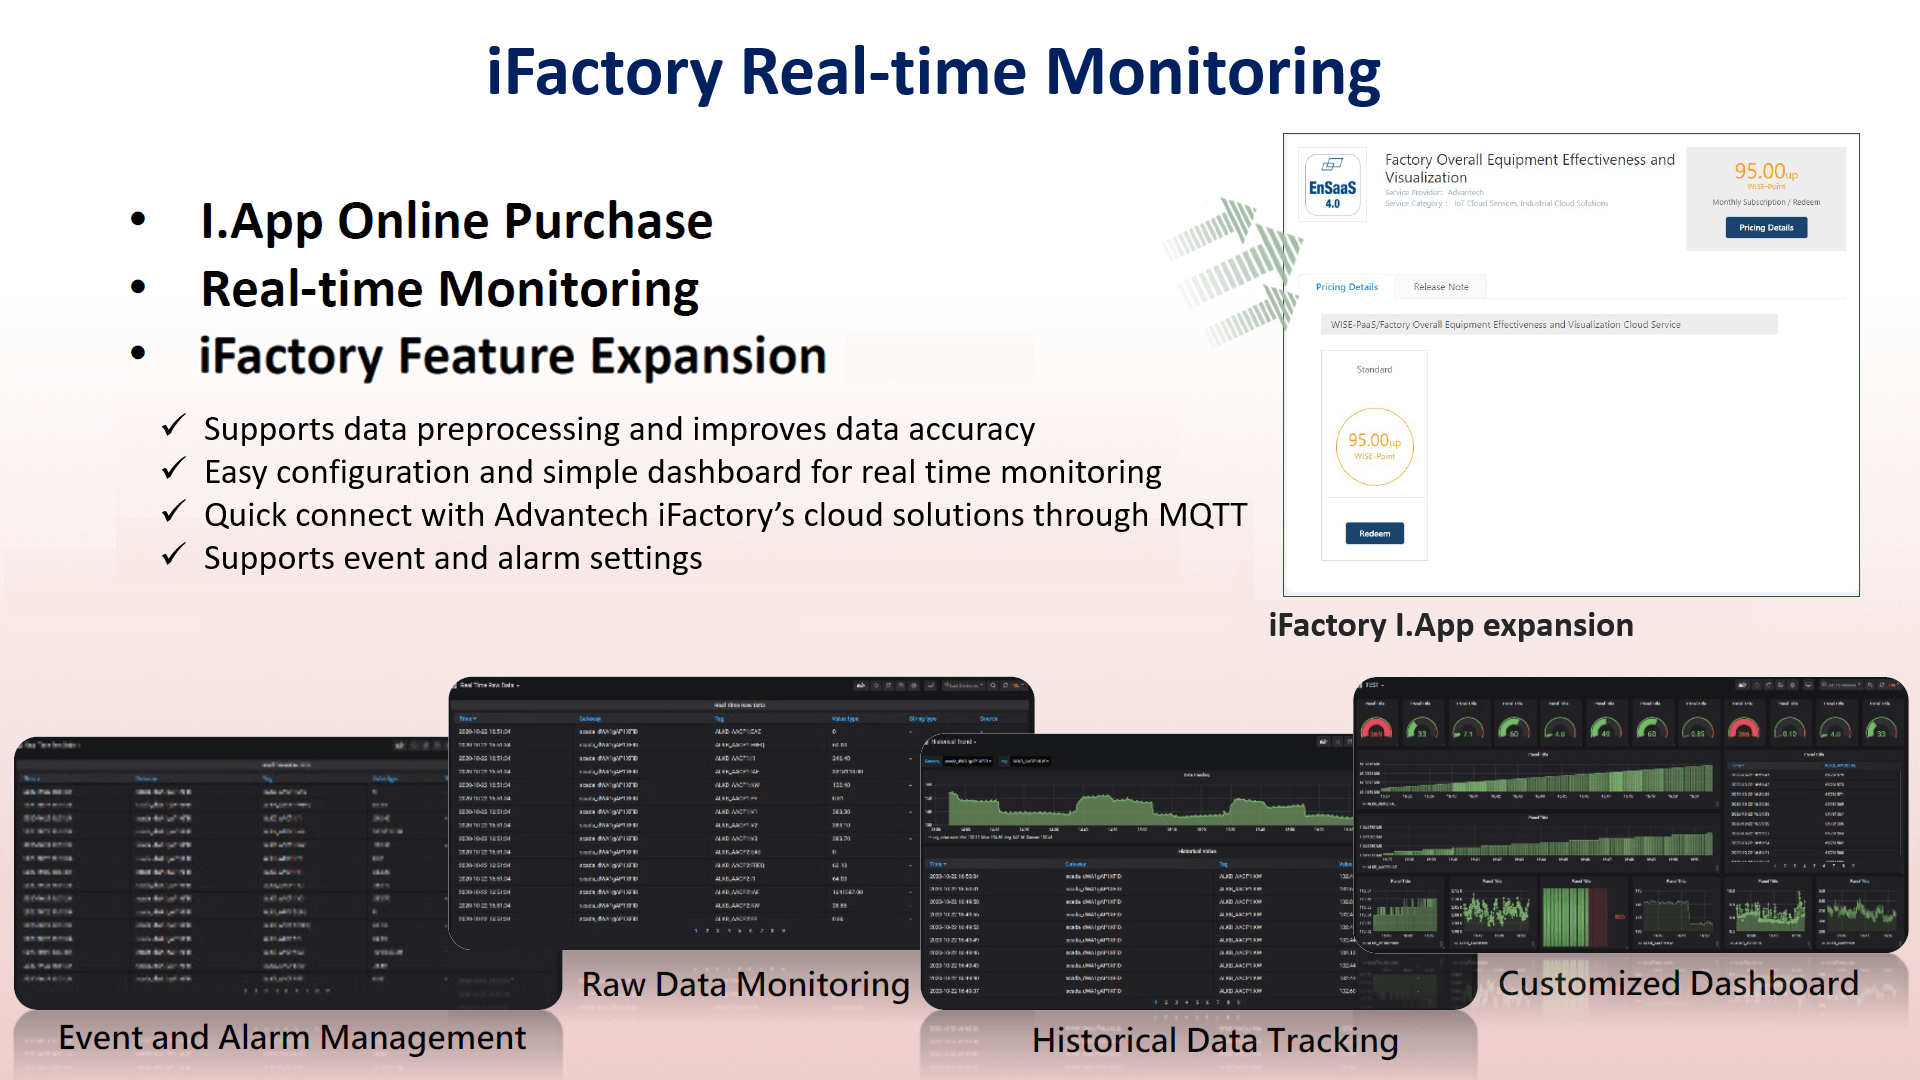 Real-Time Monitoring